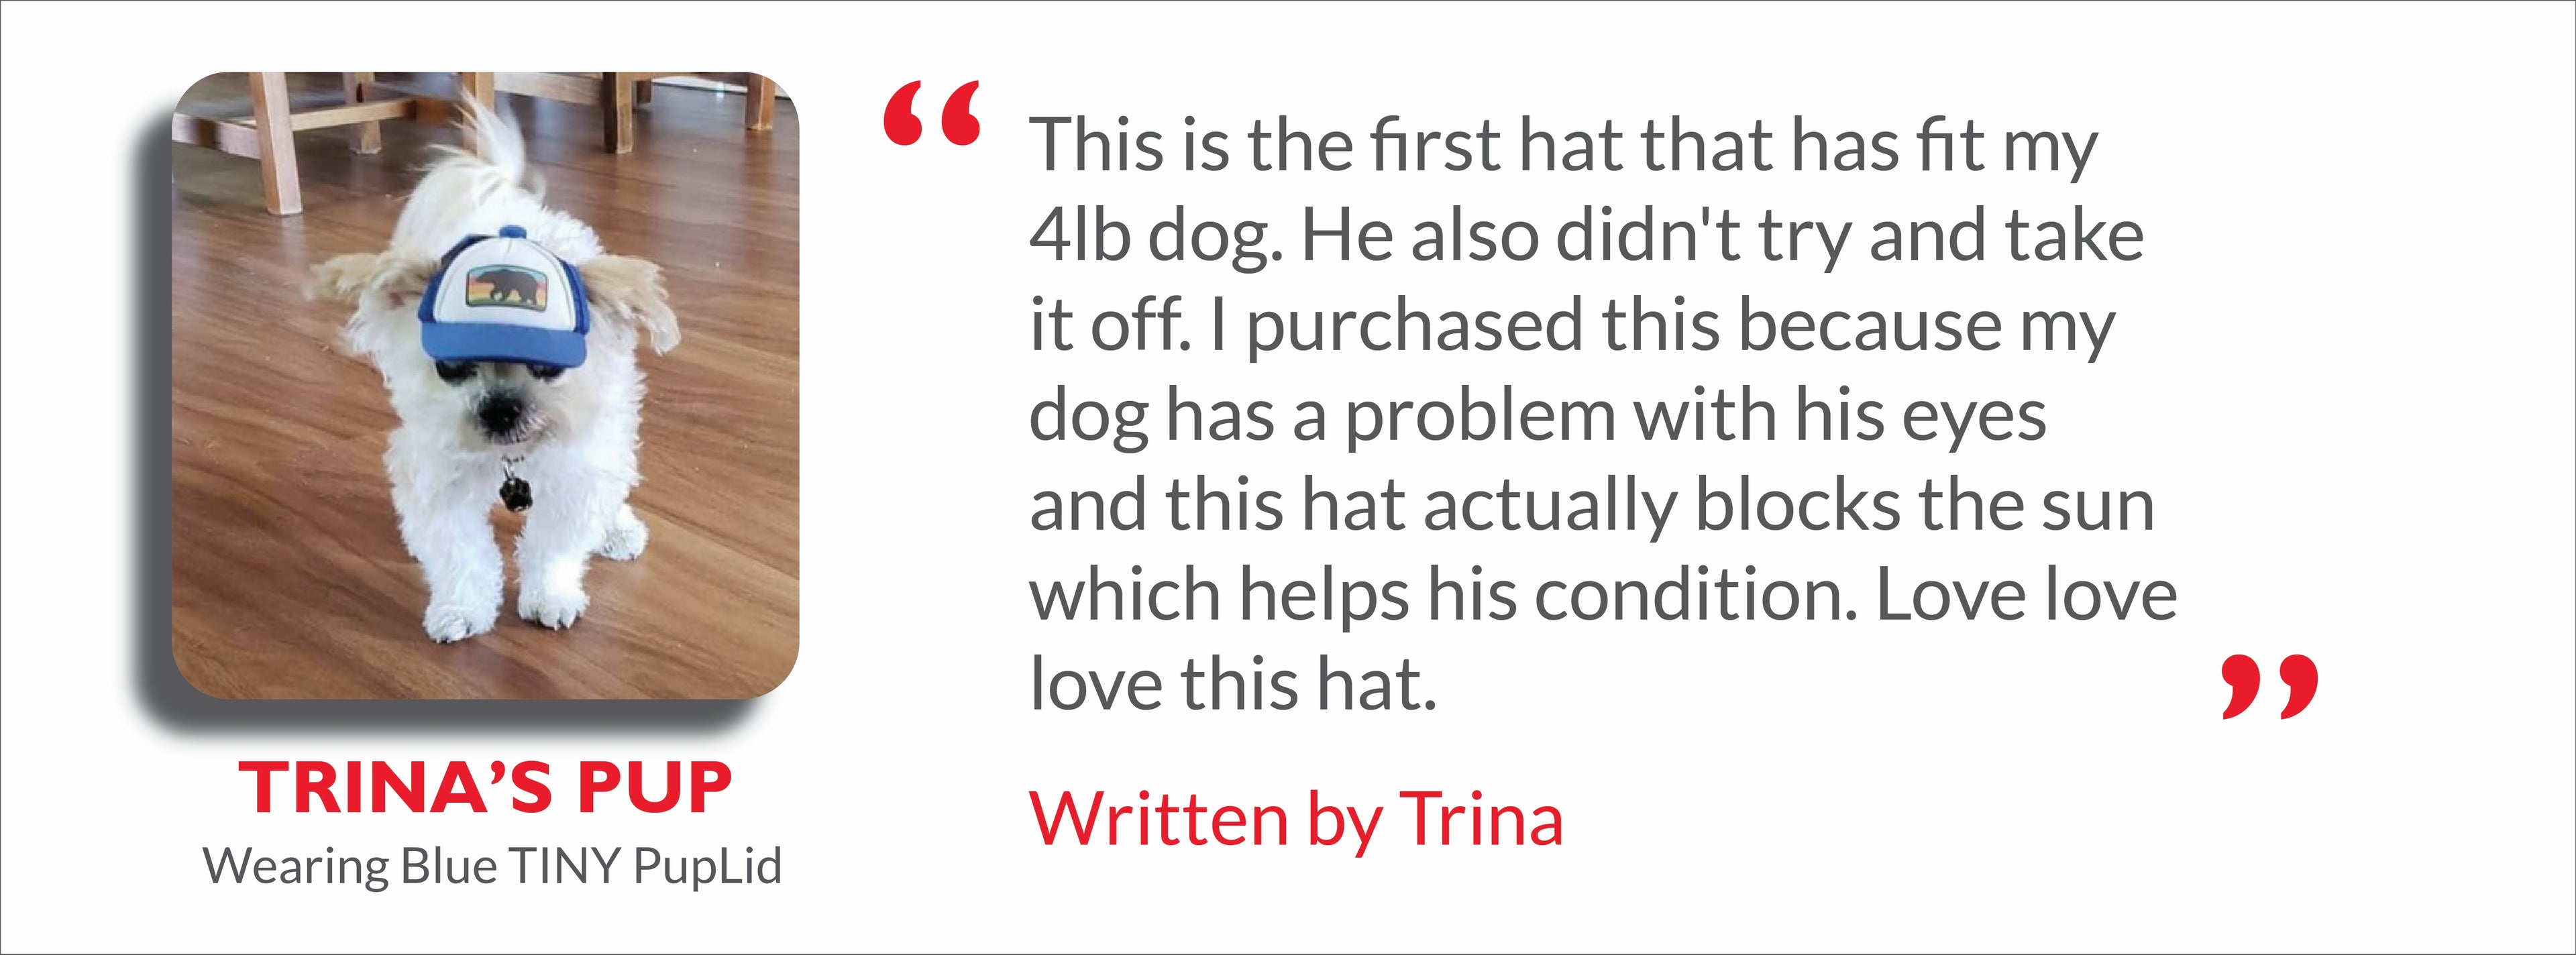 Premium Hats for Dogs, Cats and Their Families